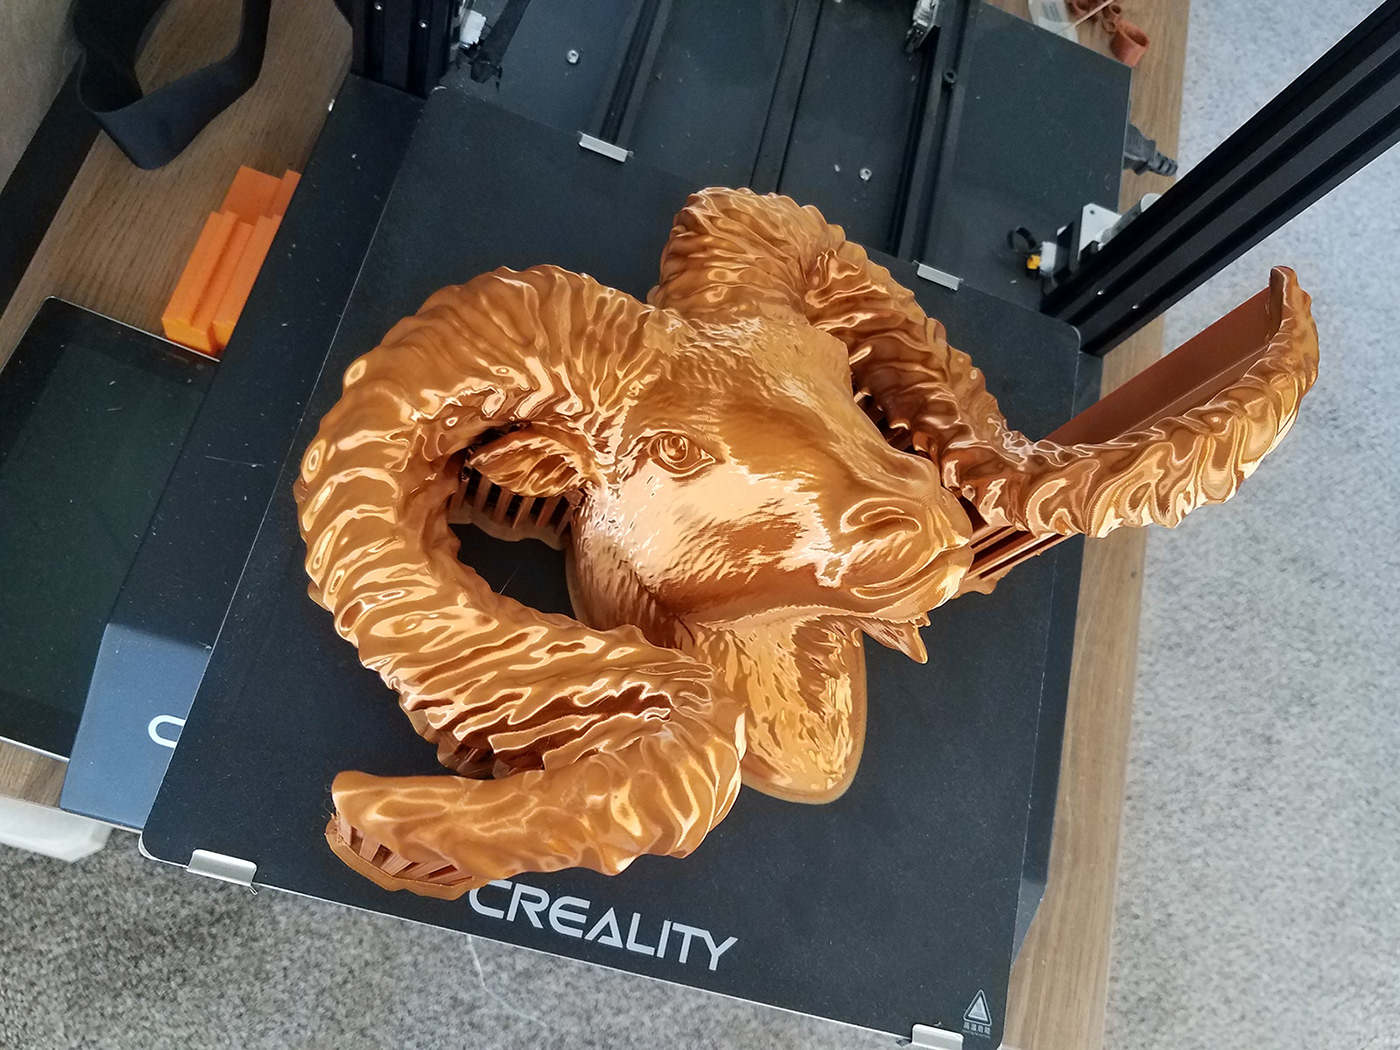 3D Printed Sculpture on the Build-Plate ...finished process